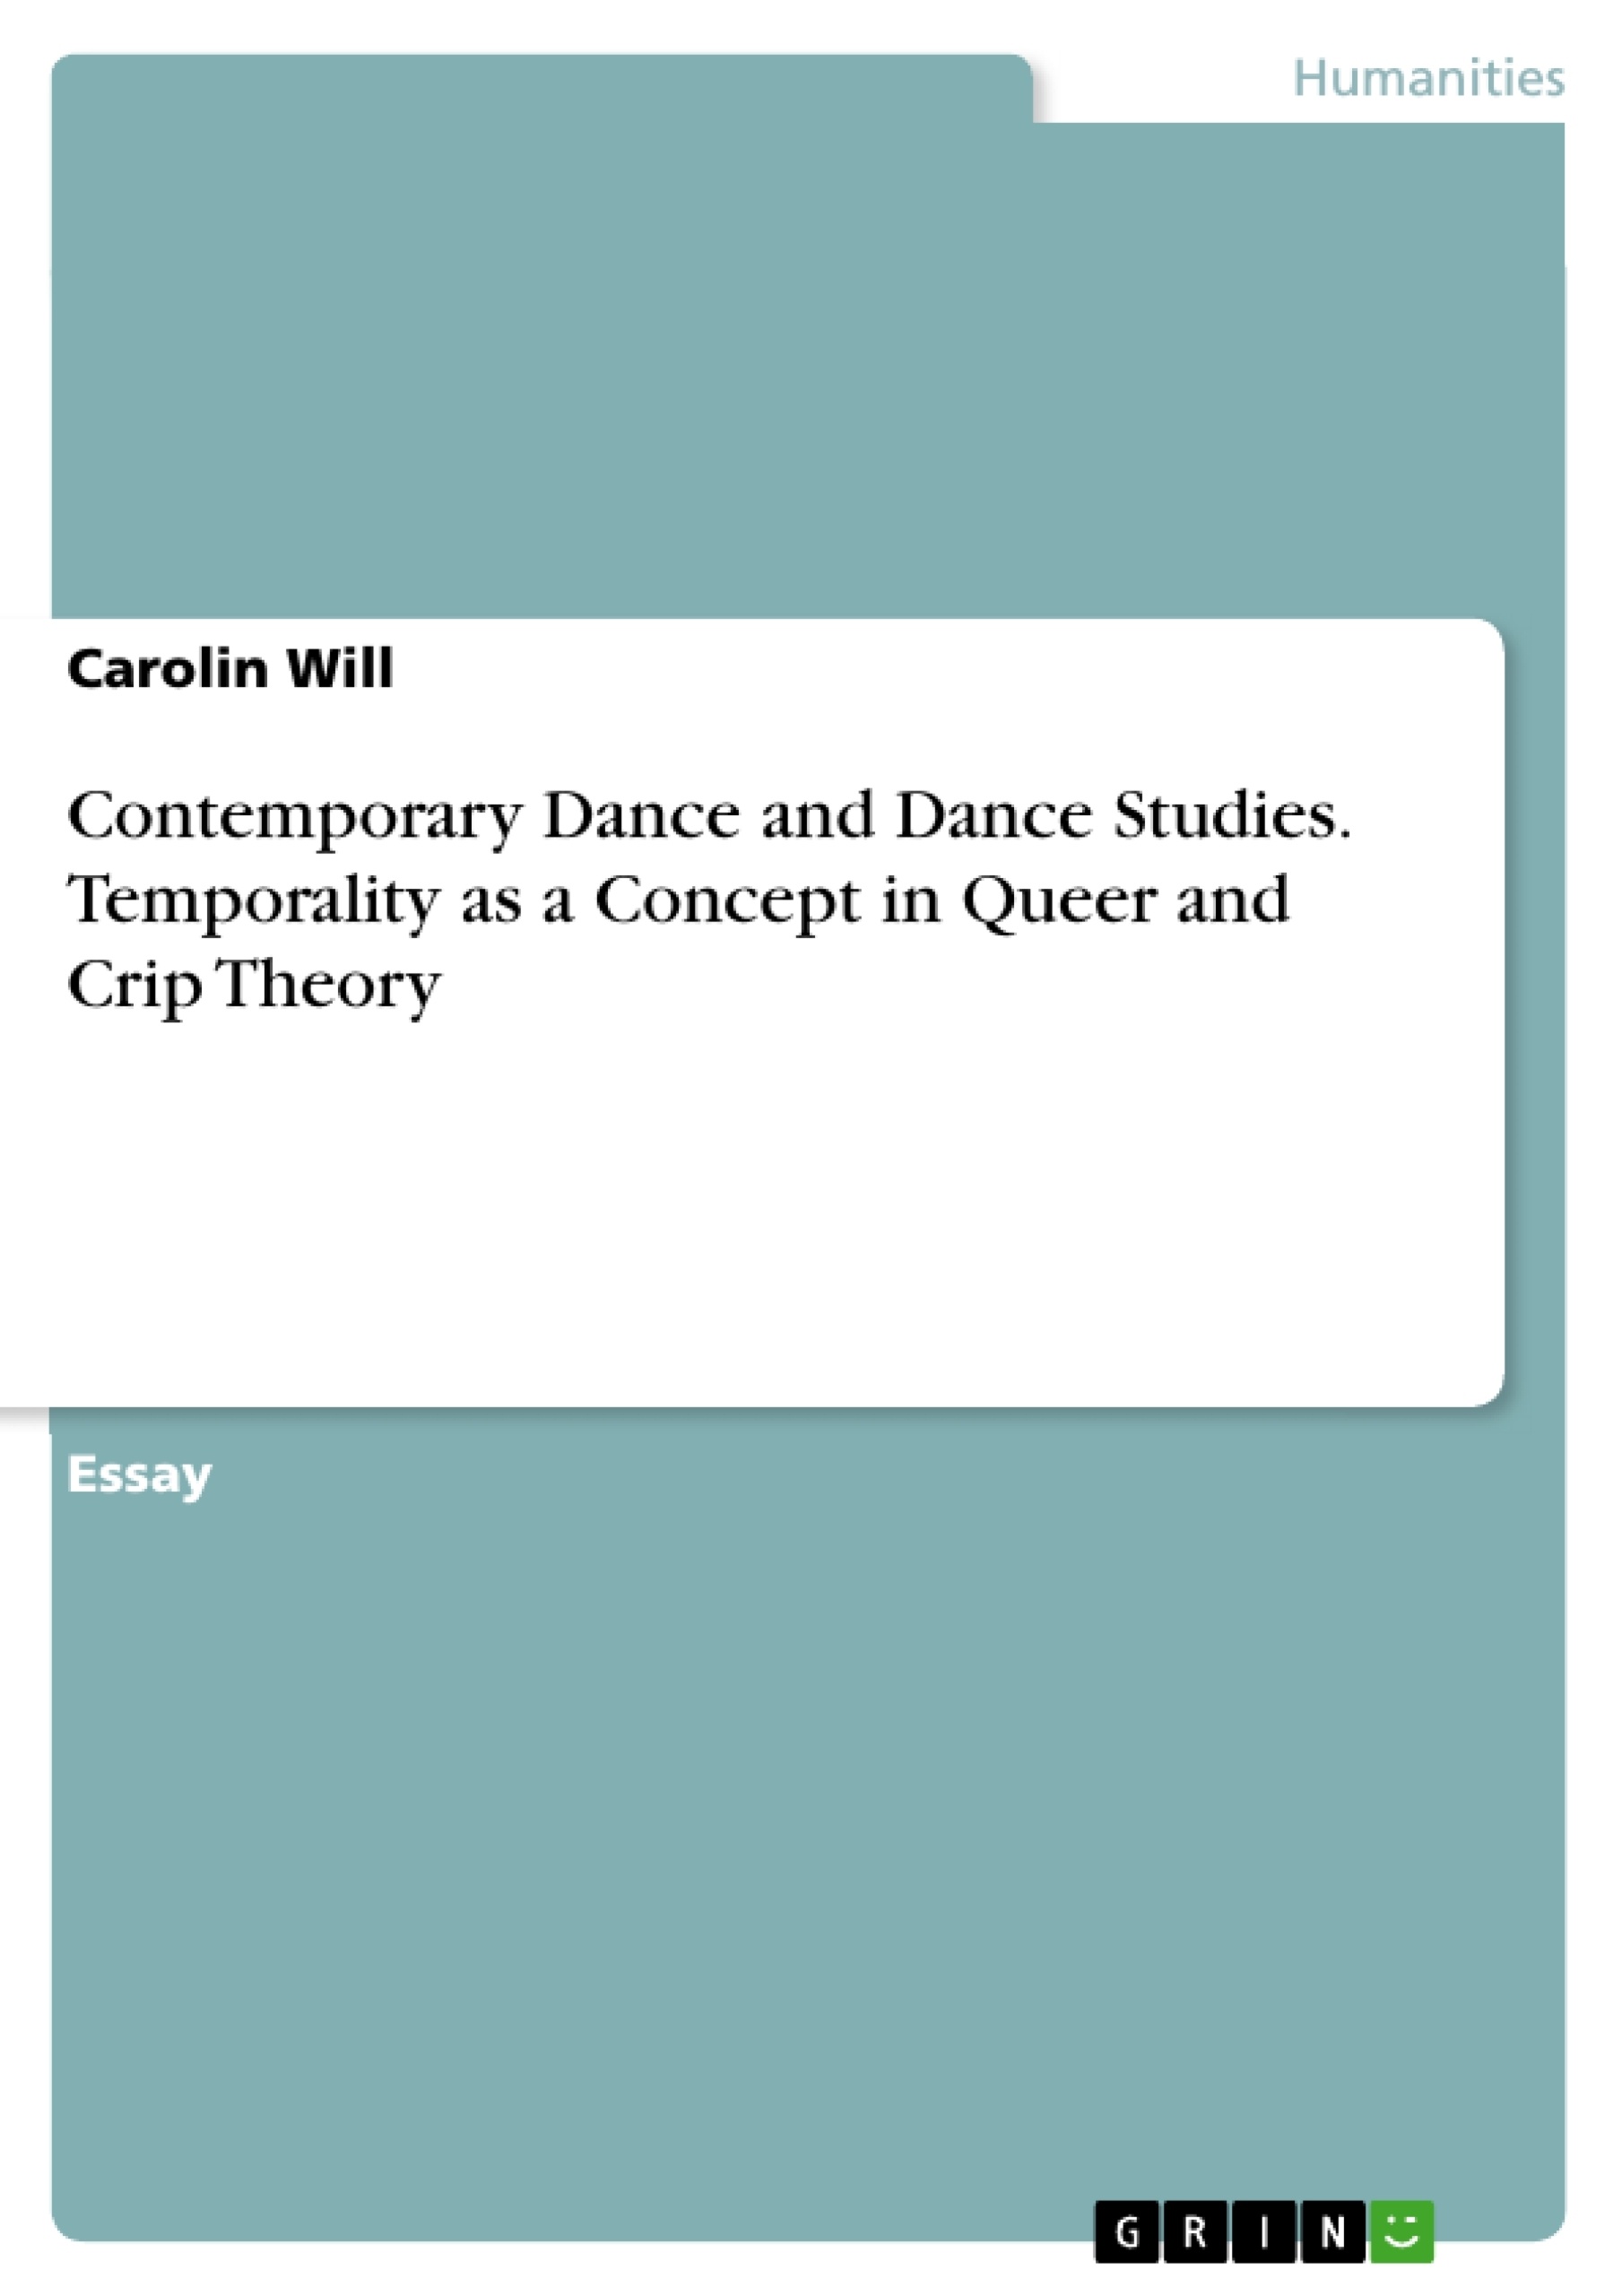 Titel: Contemporary Dance and Dance Studies. Temporality as a Concept in Queer and Crip Theory